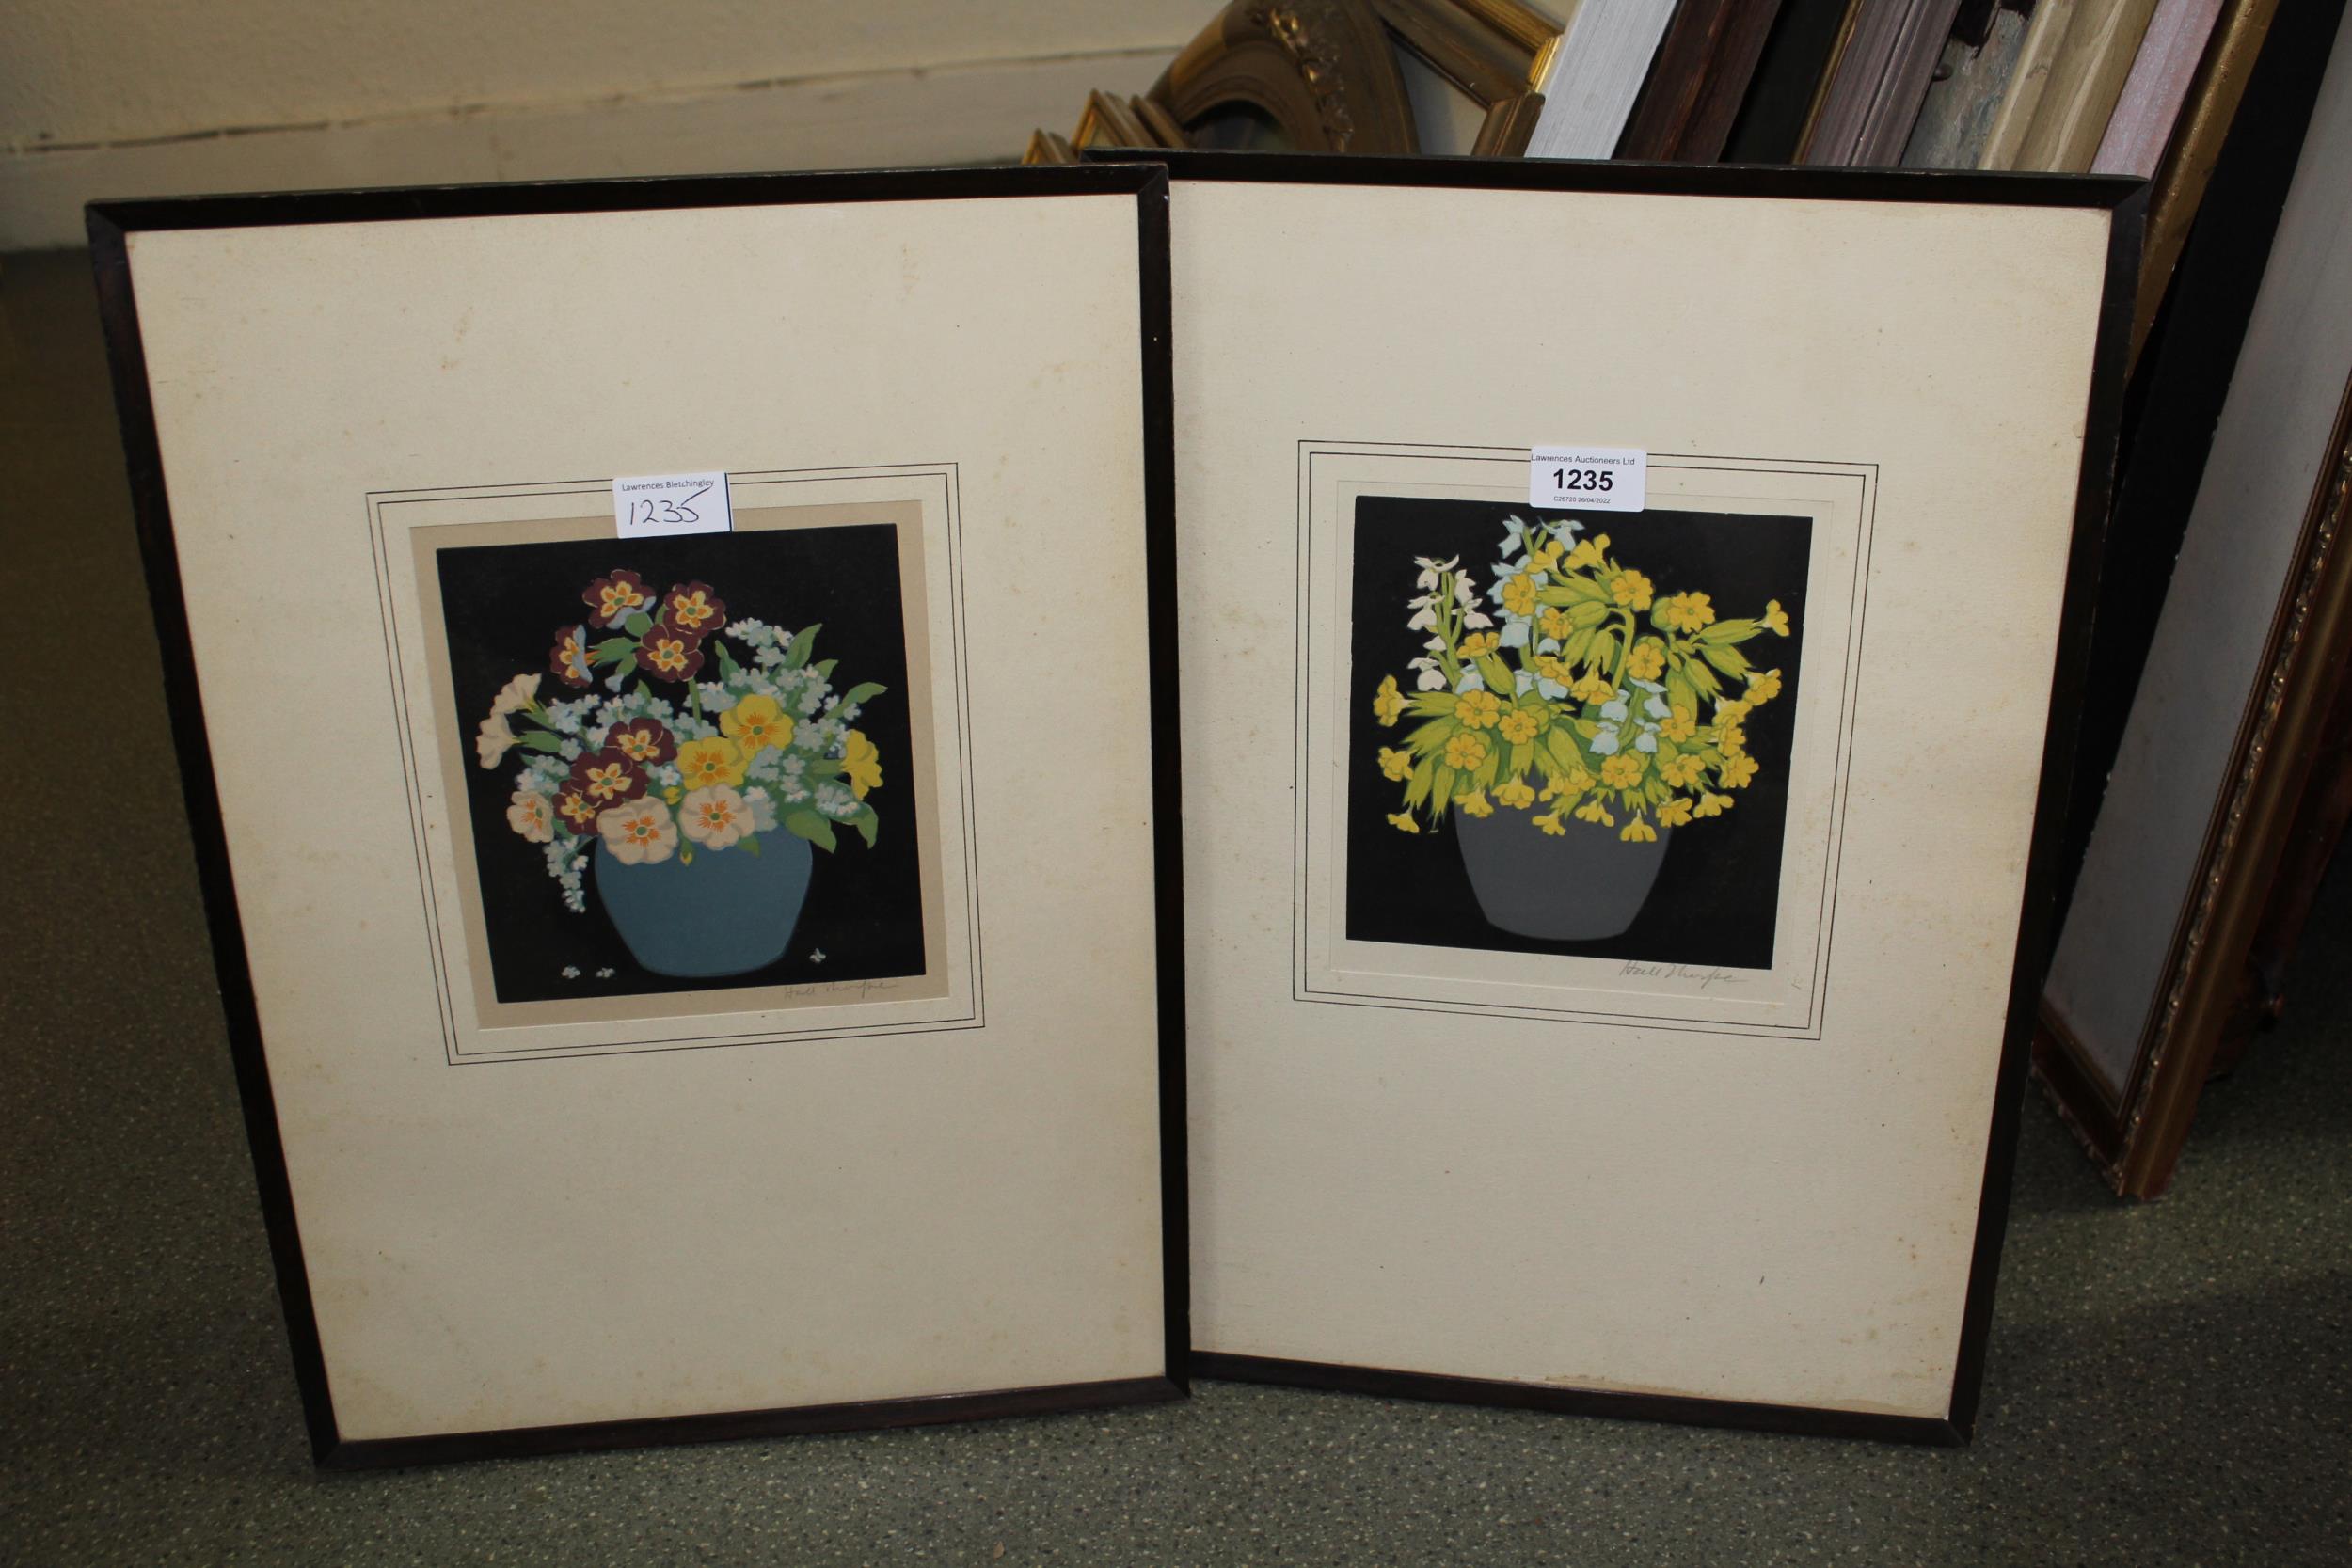 John Hall Thorpe, two woodcut prints in colours, flowers in blue pots on black ground, both signed - Image 3 of 3